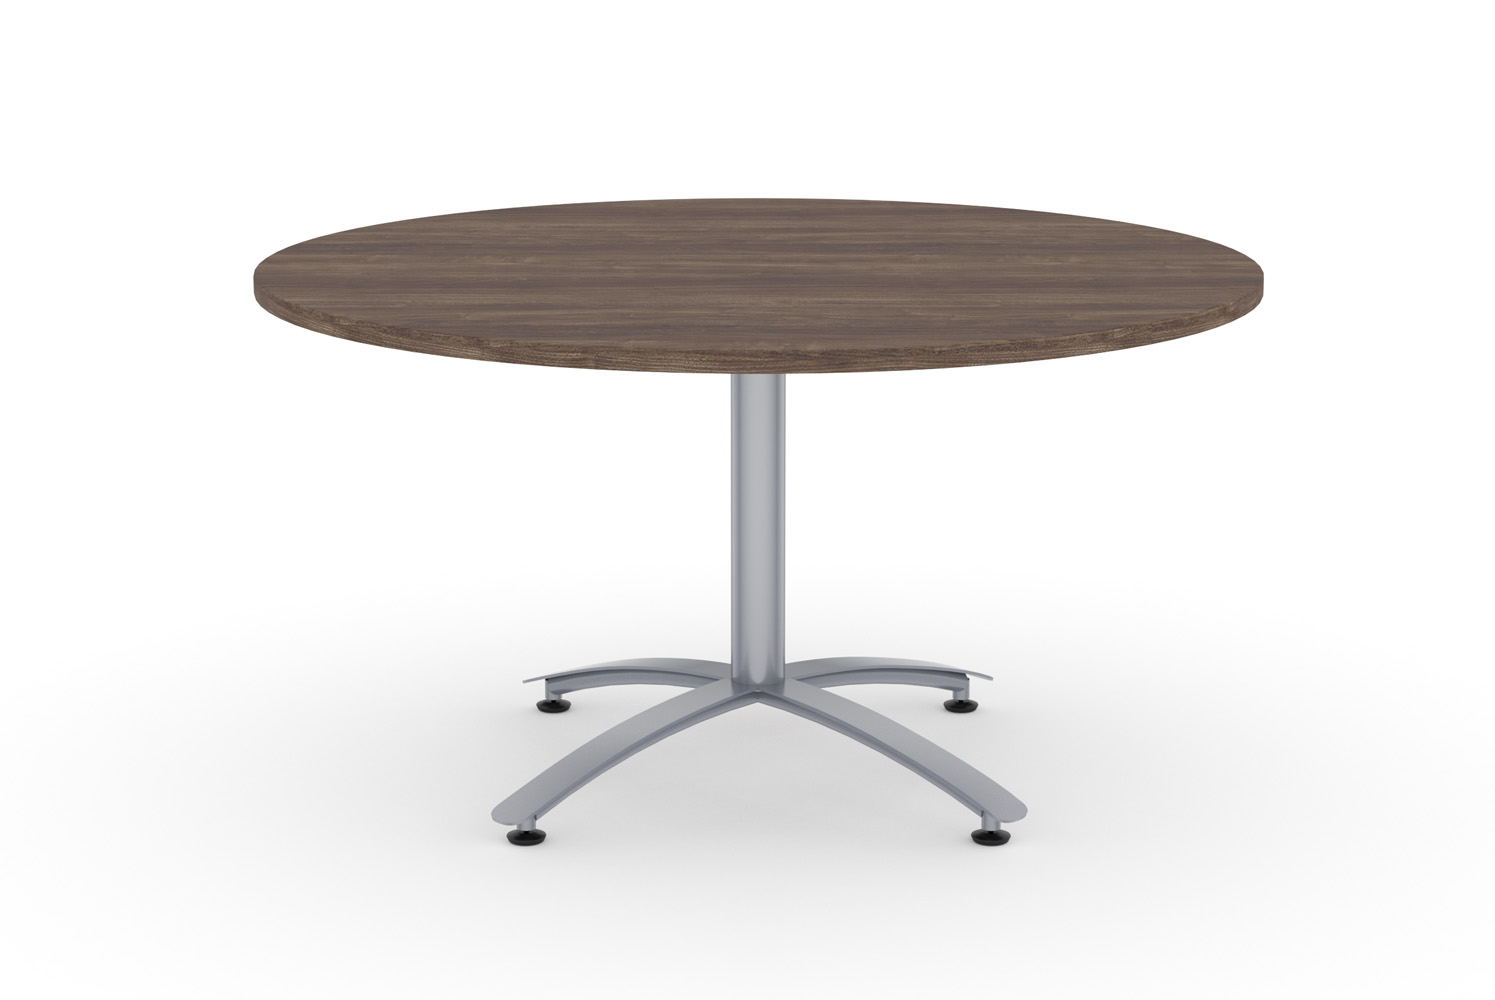 Arccos 54 inch round cafe table